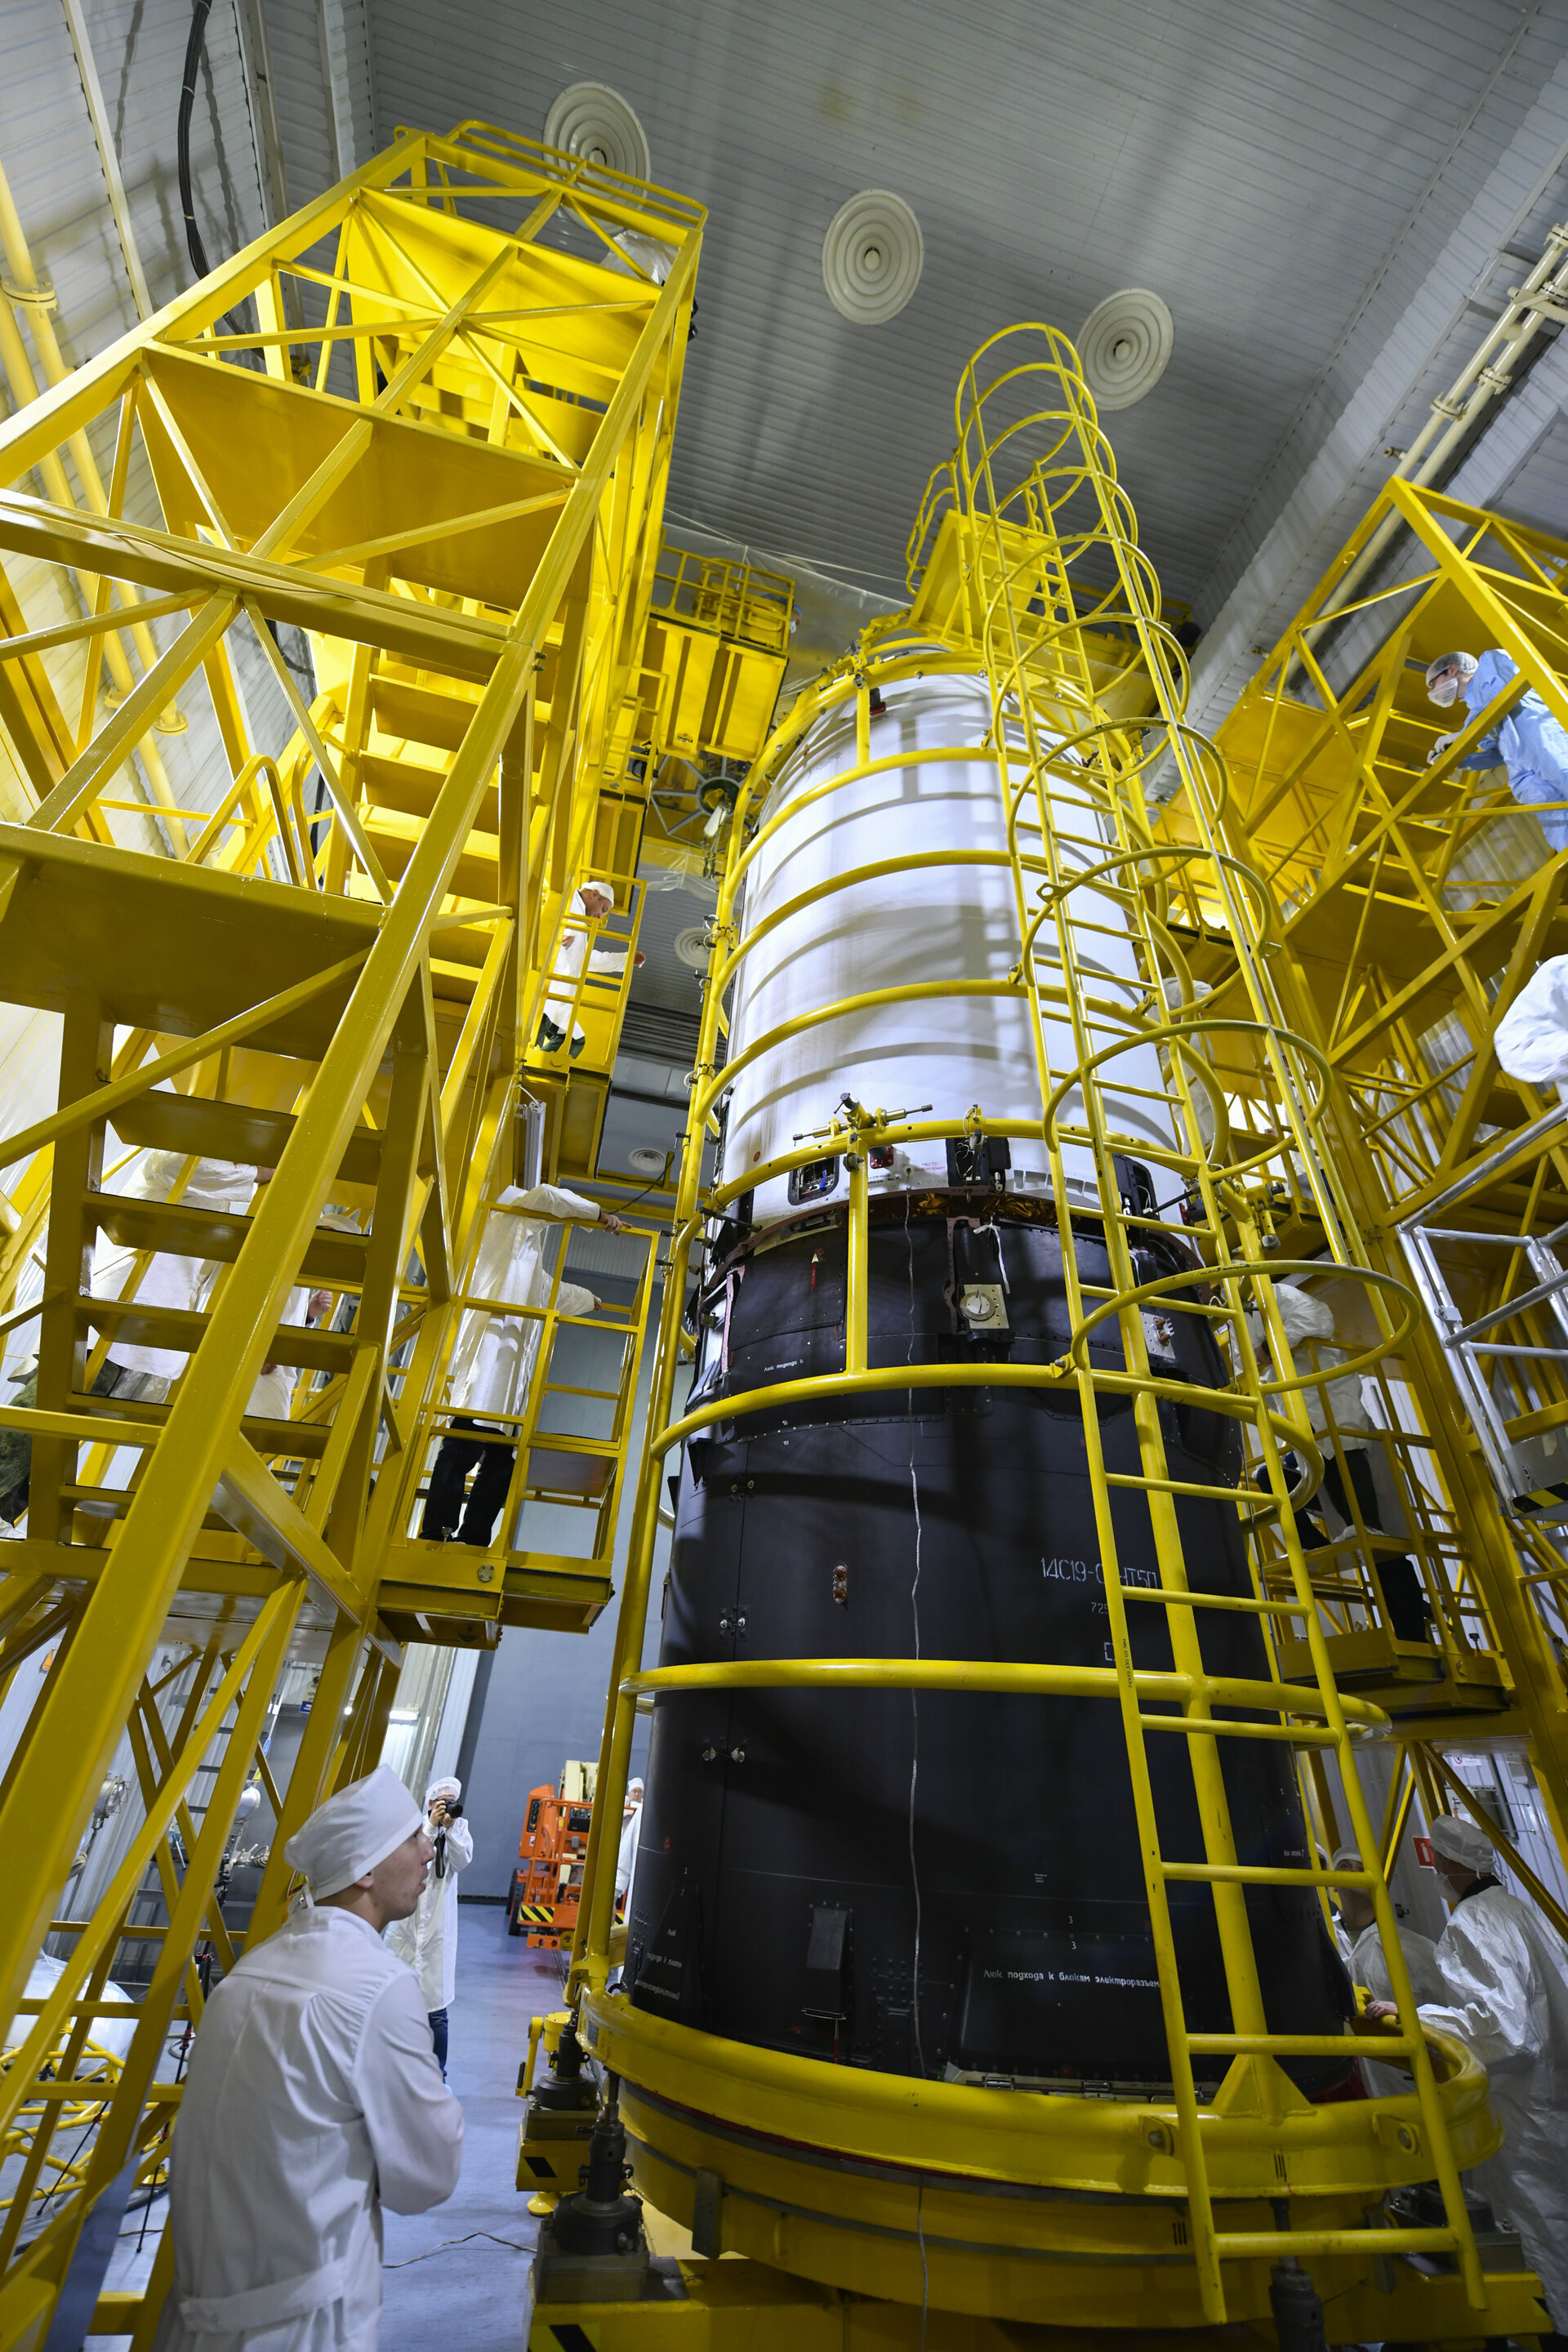 Encapsulation of Sentinel-5P within the launcher fairing